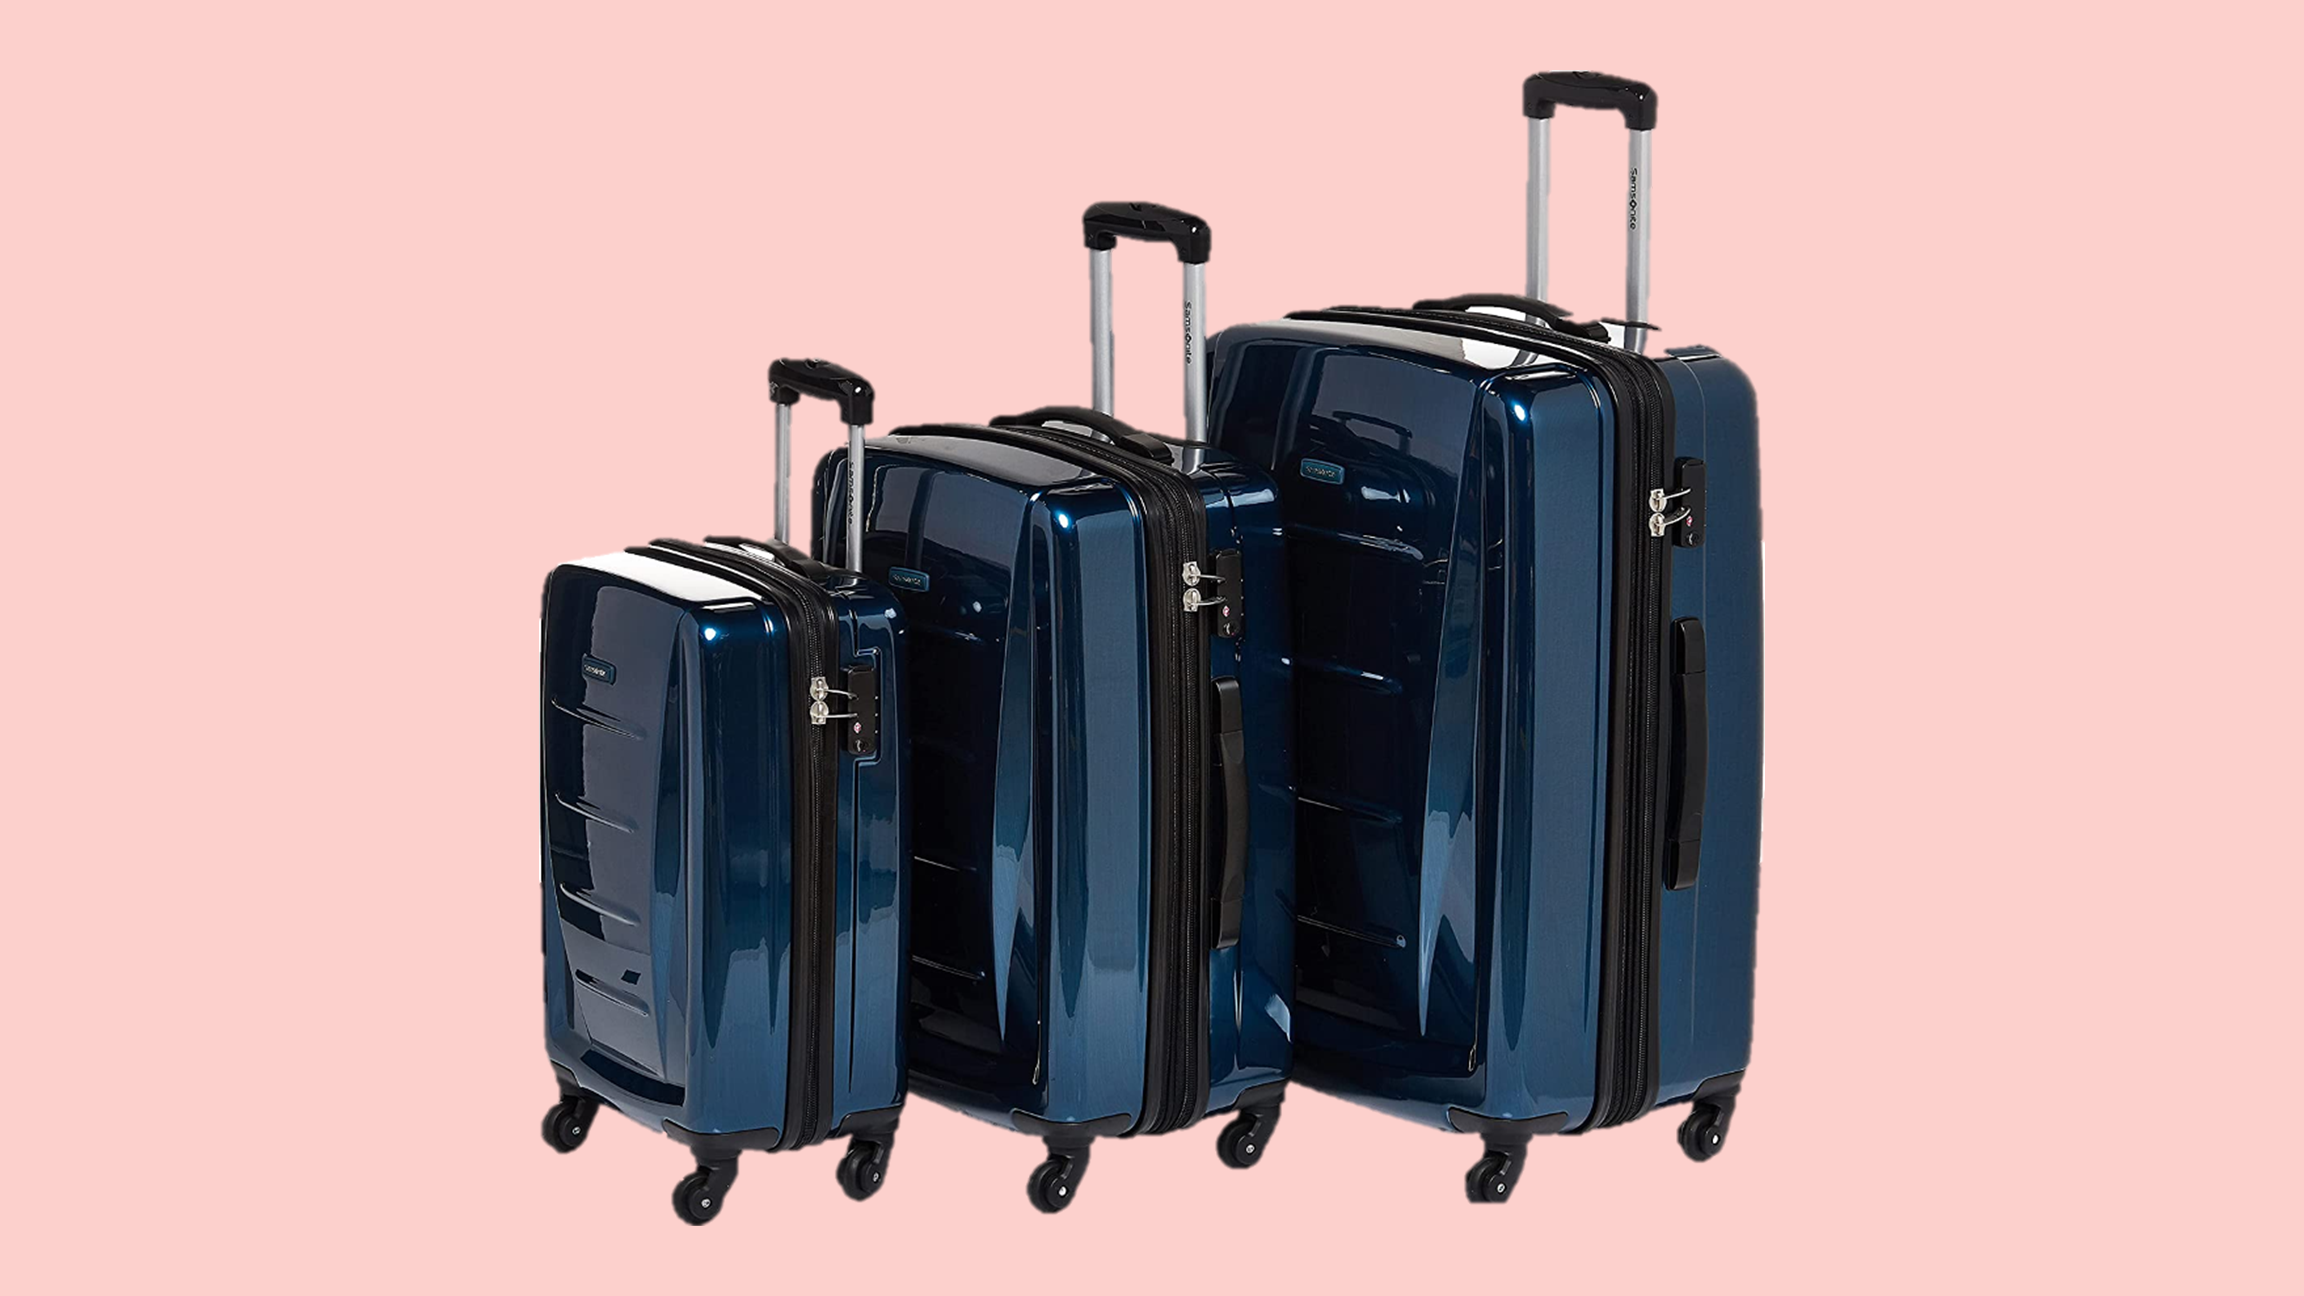 Source Travel Bags Luggage Set Trolley Suitcase 4 Wheels Women Luggage Set  Travel Bag Abs Trolley Luggage Set on m.